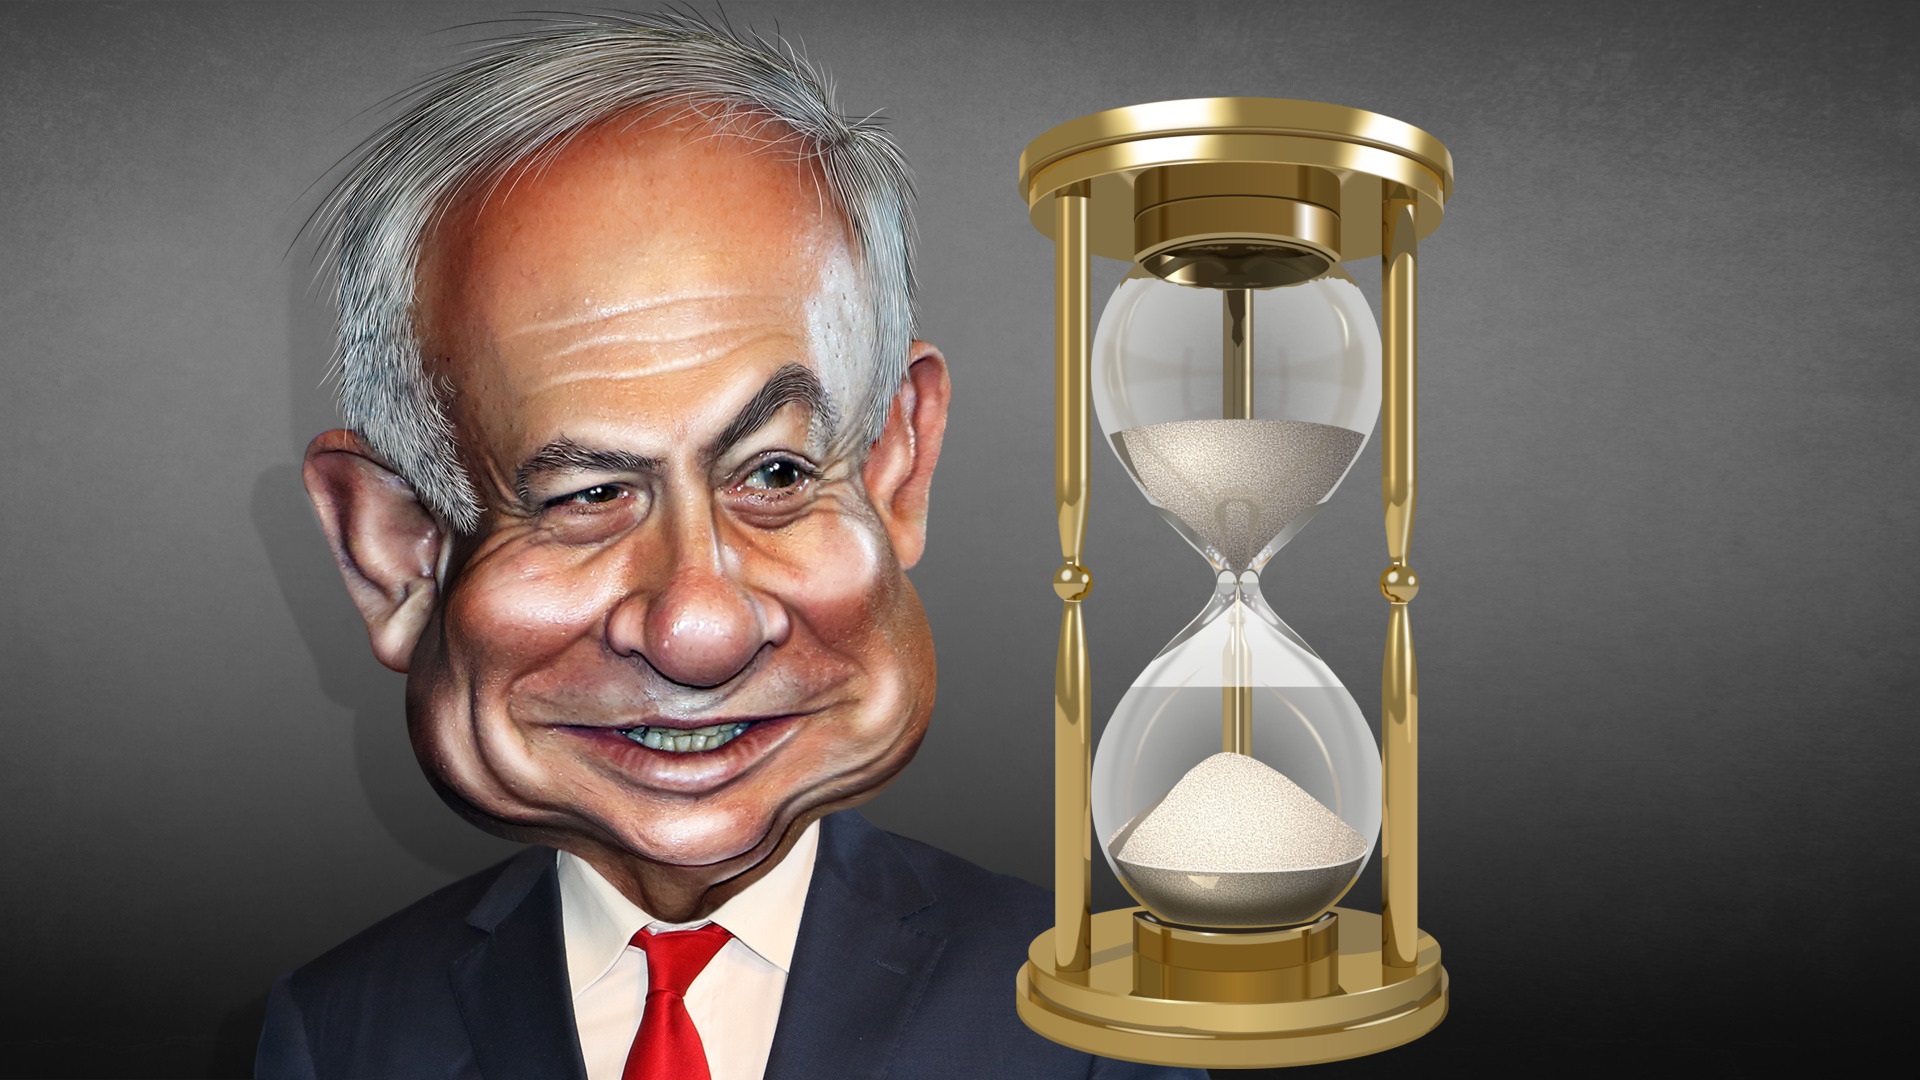 Netanyahu Loses Crucial Vote With Time Running Out